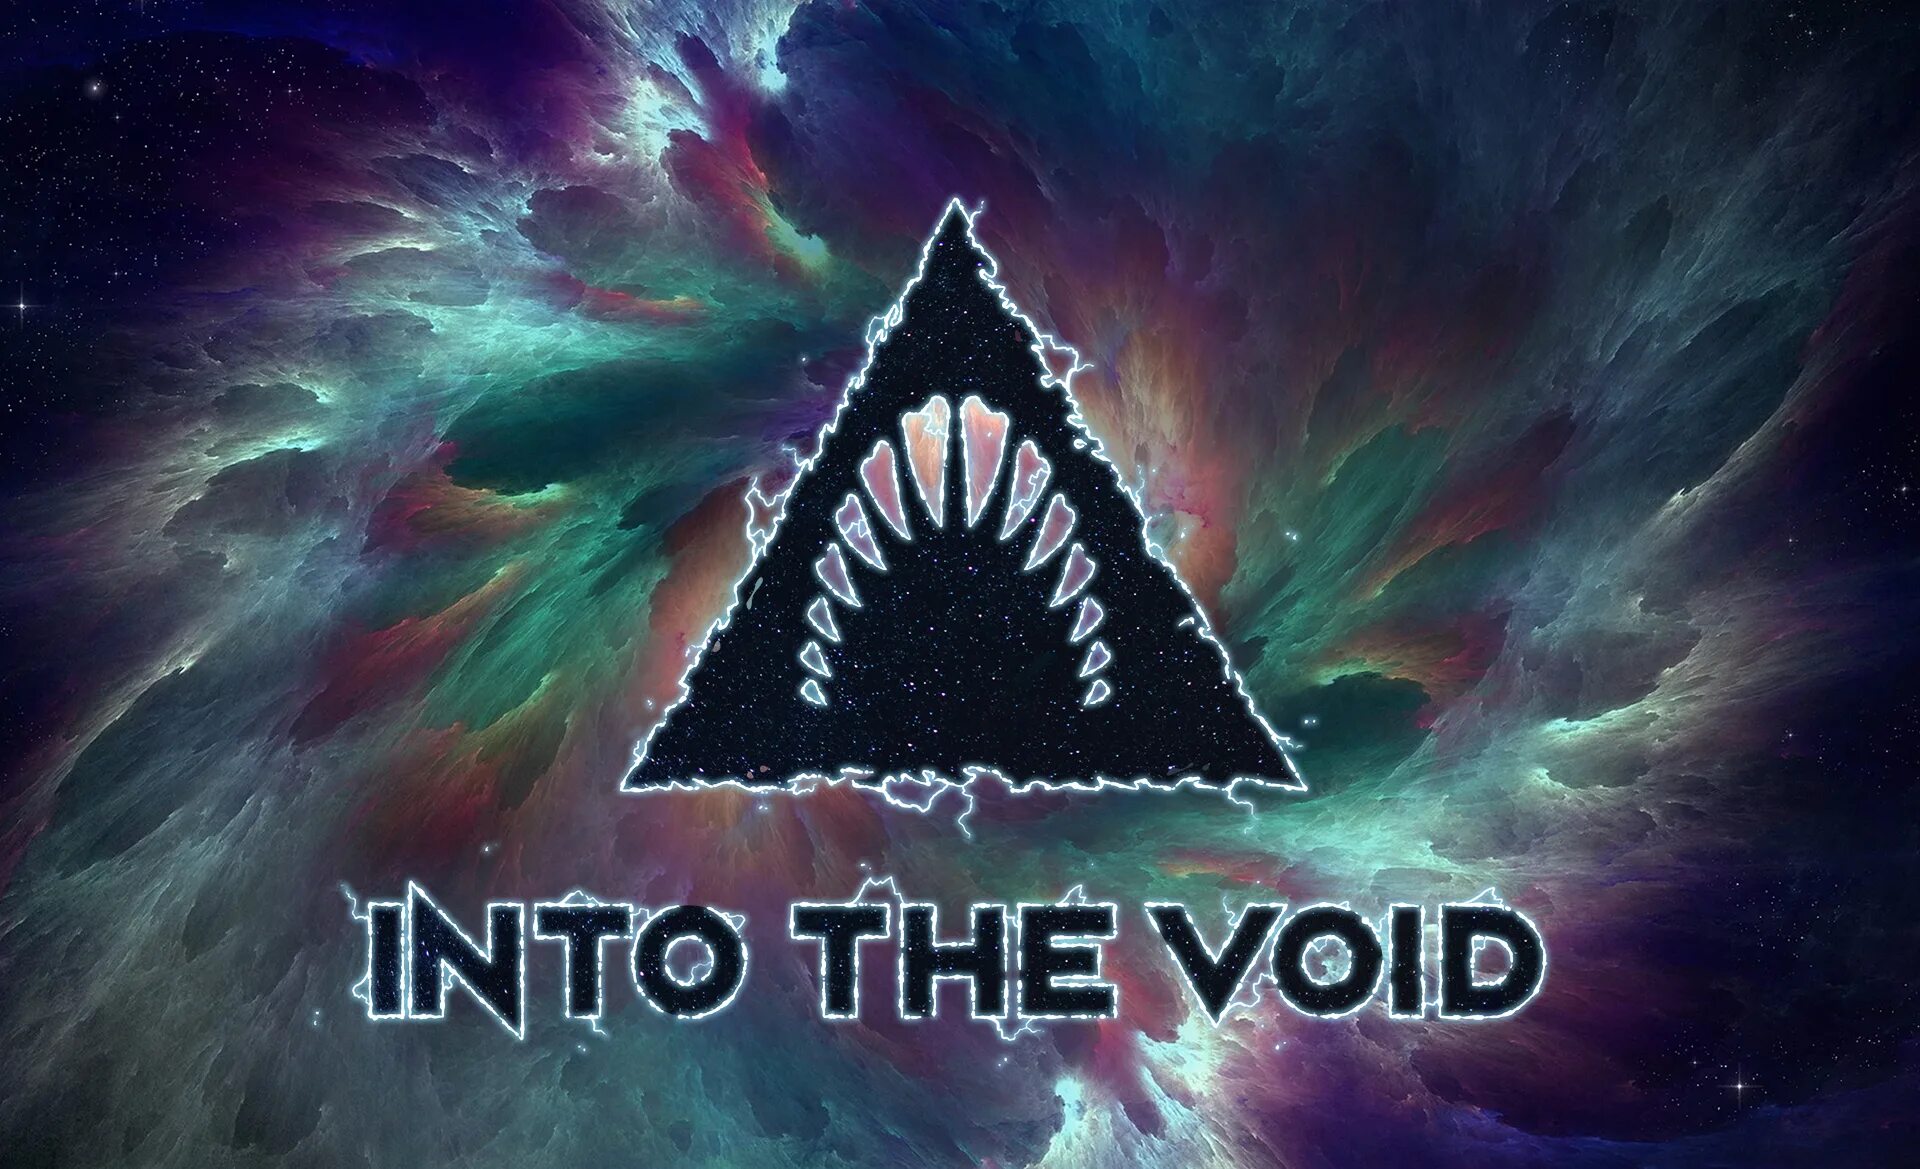 Feel the void. A Void. Into the Void. The Void значок. Depths of the Void.